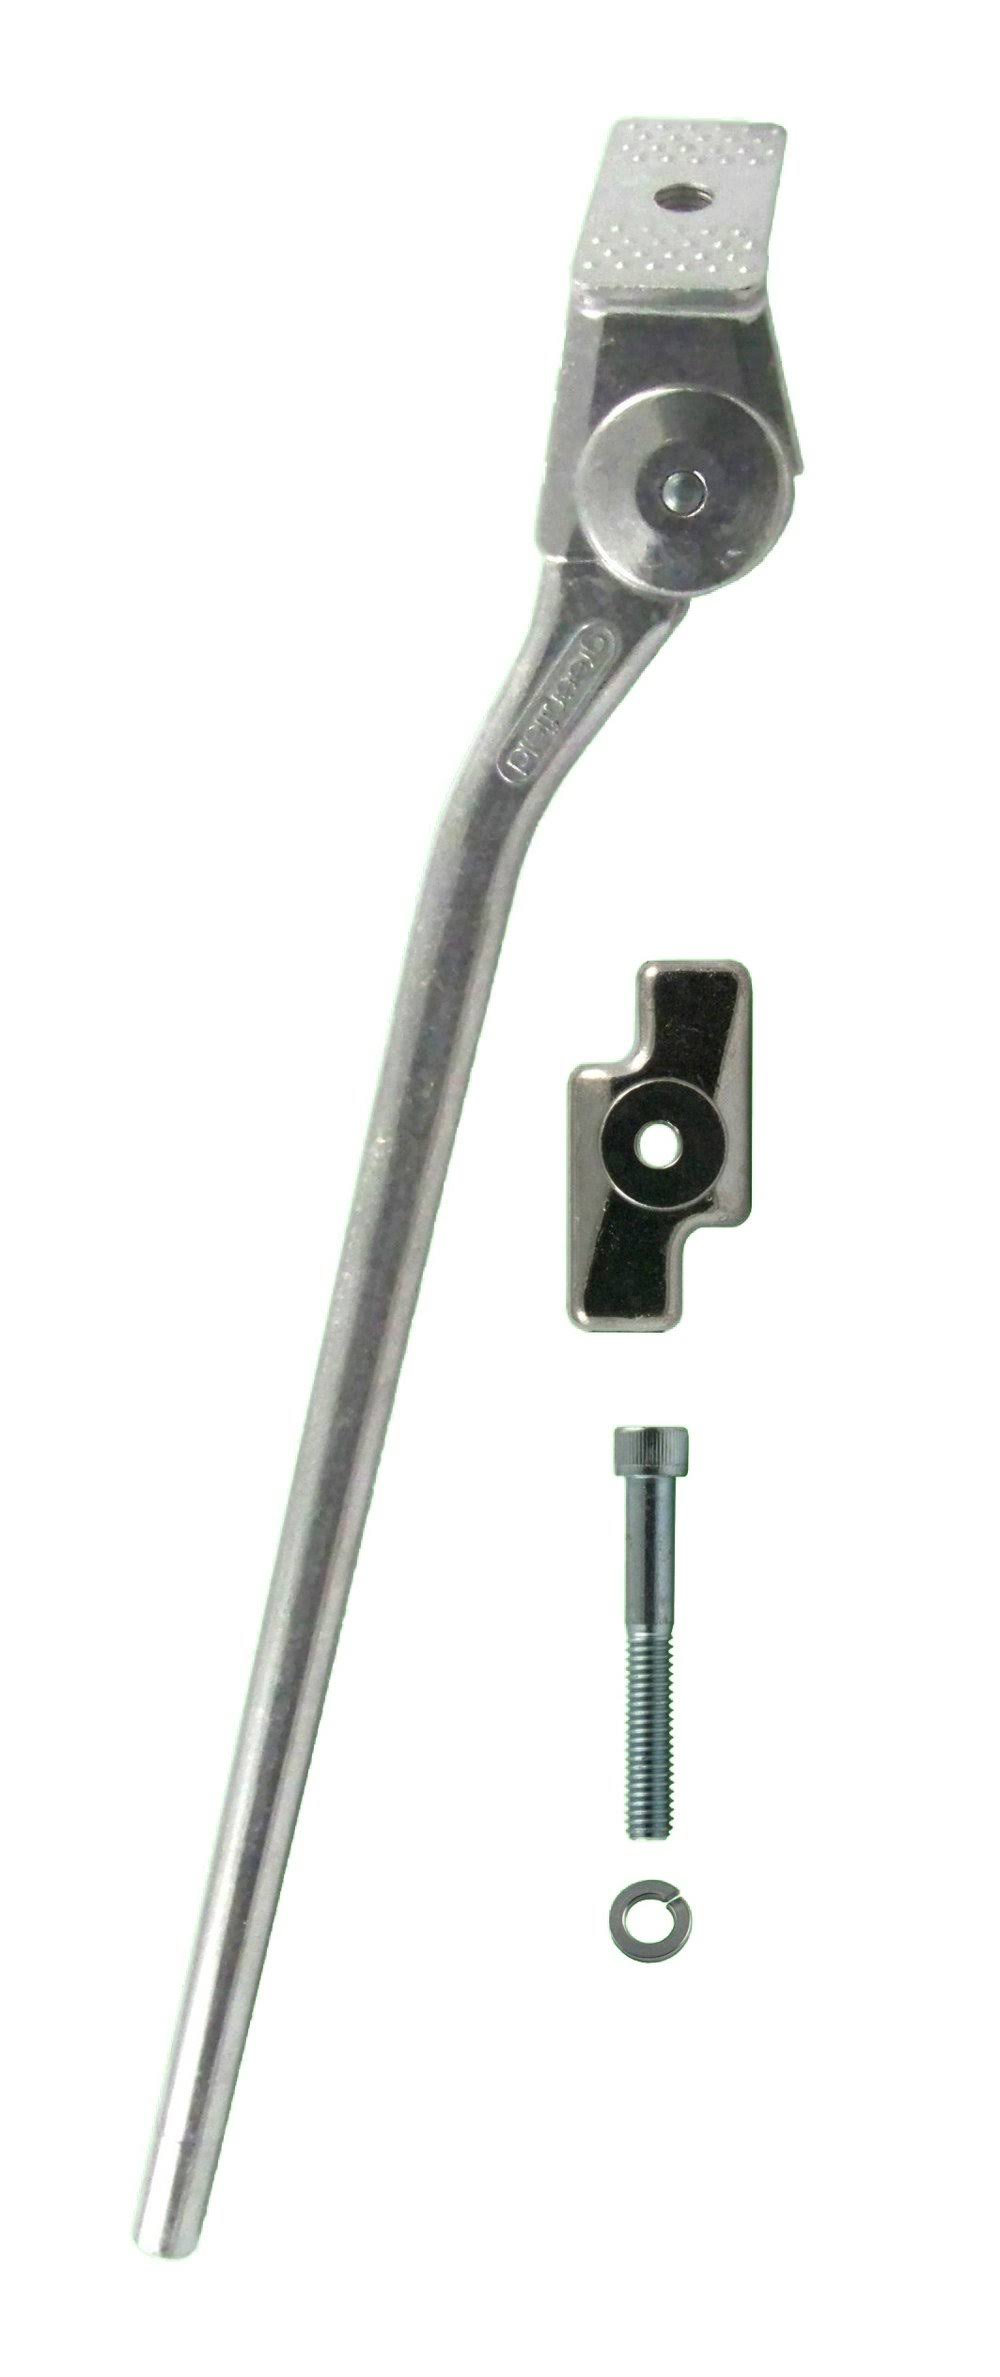 Greenfield KS2S Bicycle Kickstand - 305mm, with Retro Kit Top Plate